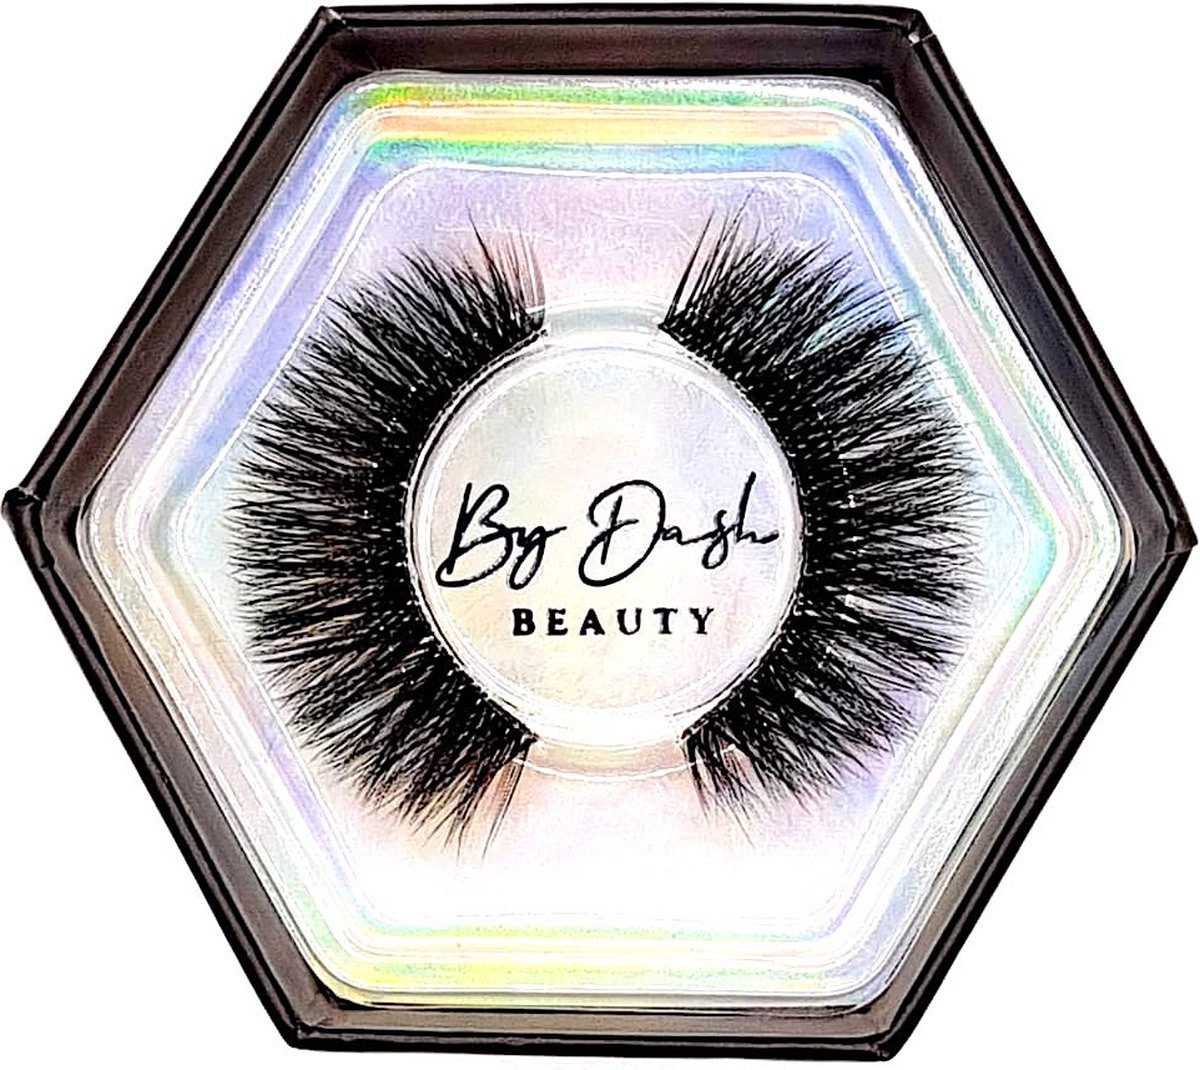 By Dash Beauty - Royal Beauty - Valse Wimpers - Nepwimpers - 3D Faux Mink Lashes - Luxury Lashes